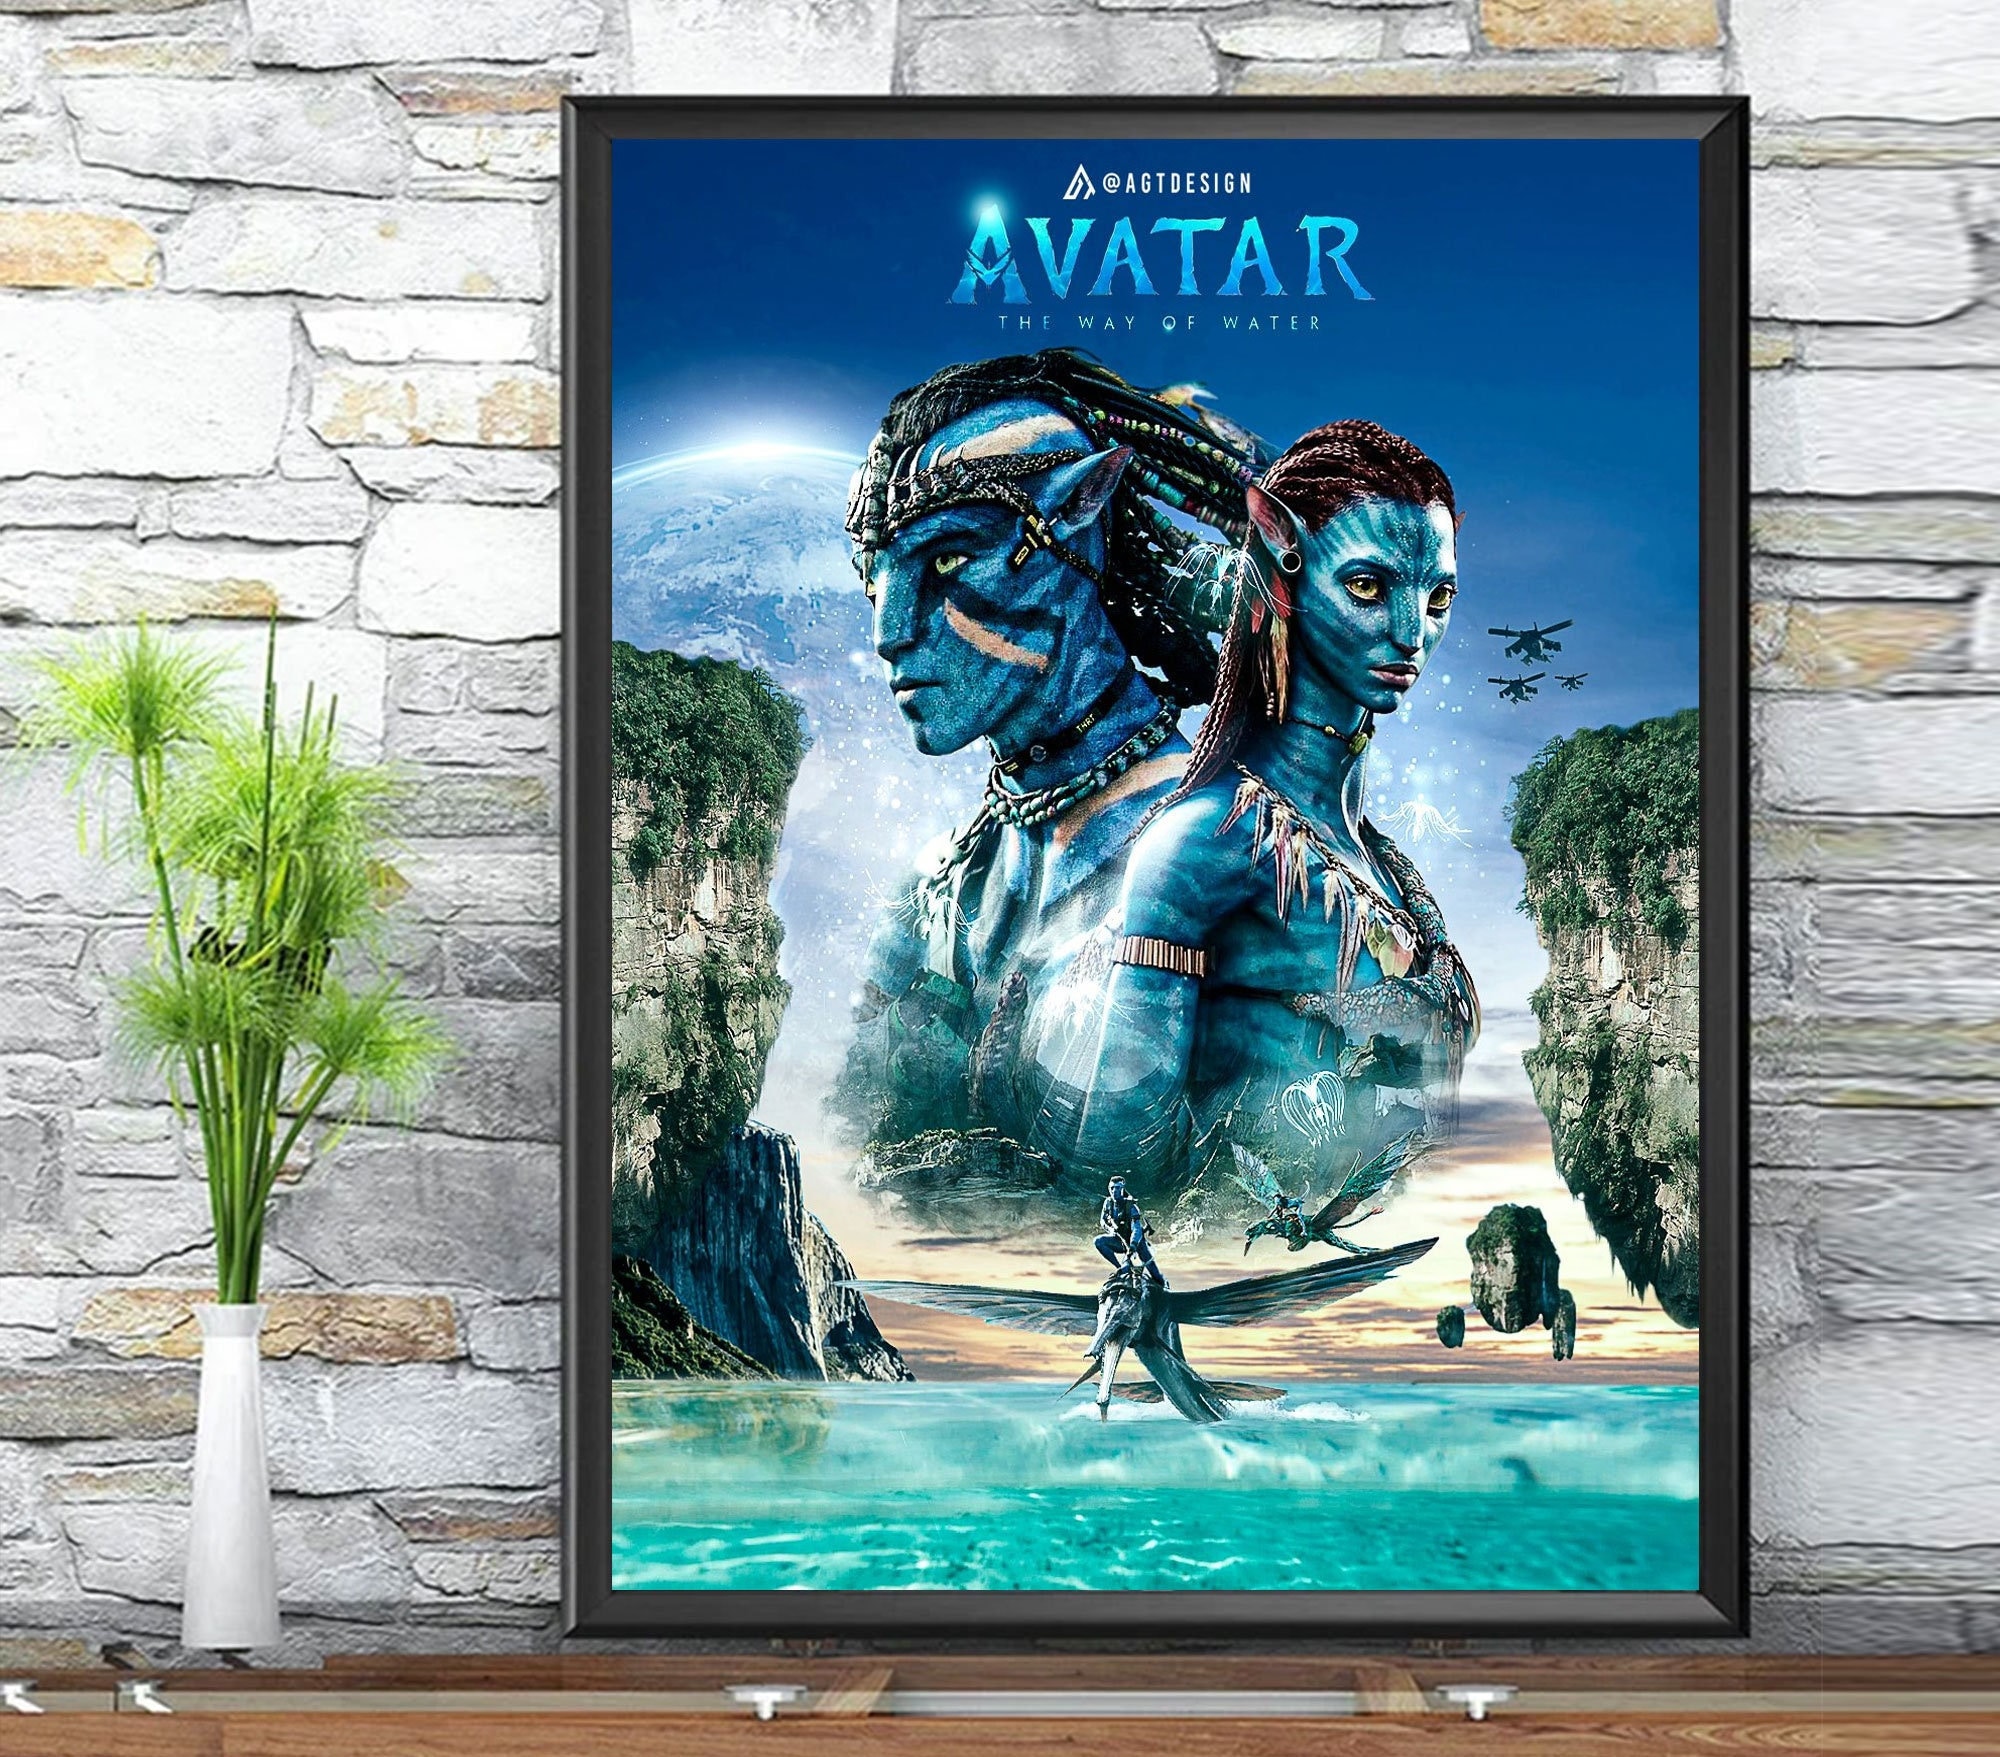 Discover Avatar The Way of Water Poster, Avatar 2 Poster, Avatar Movie 2022 Poster